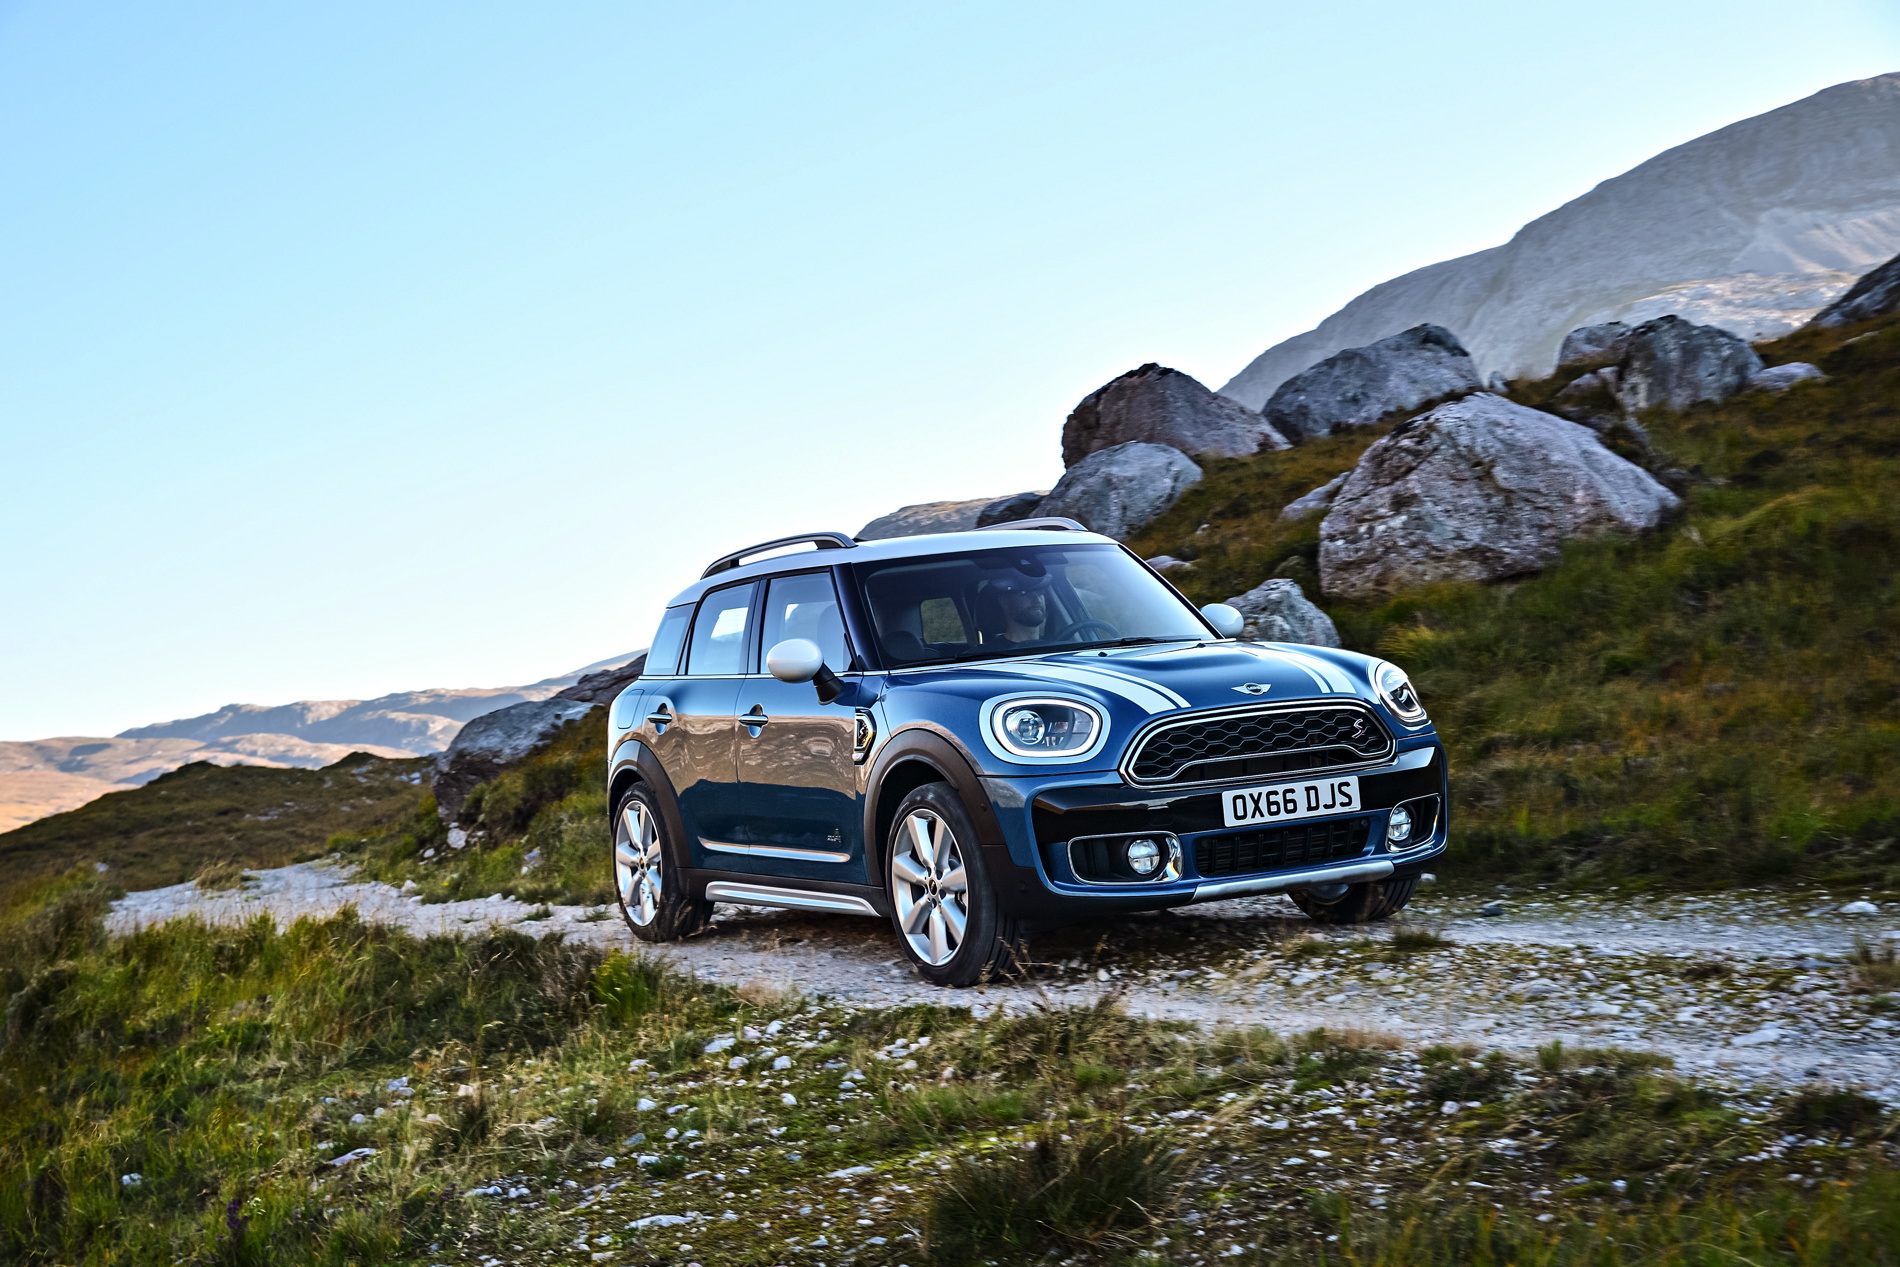 2017 MINI Countryman Has Arrived in Big Style